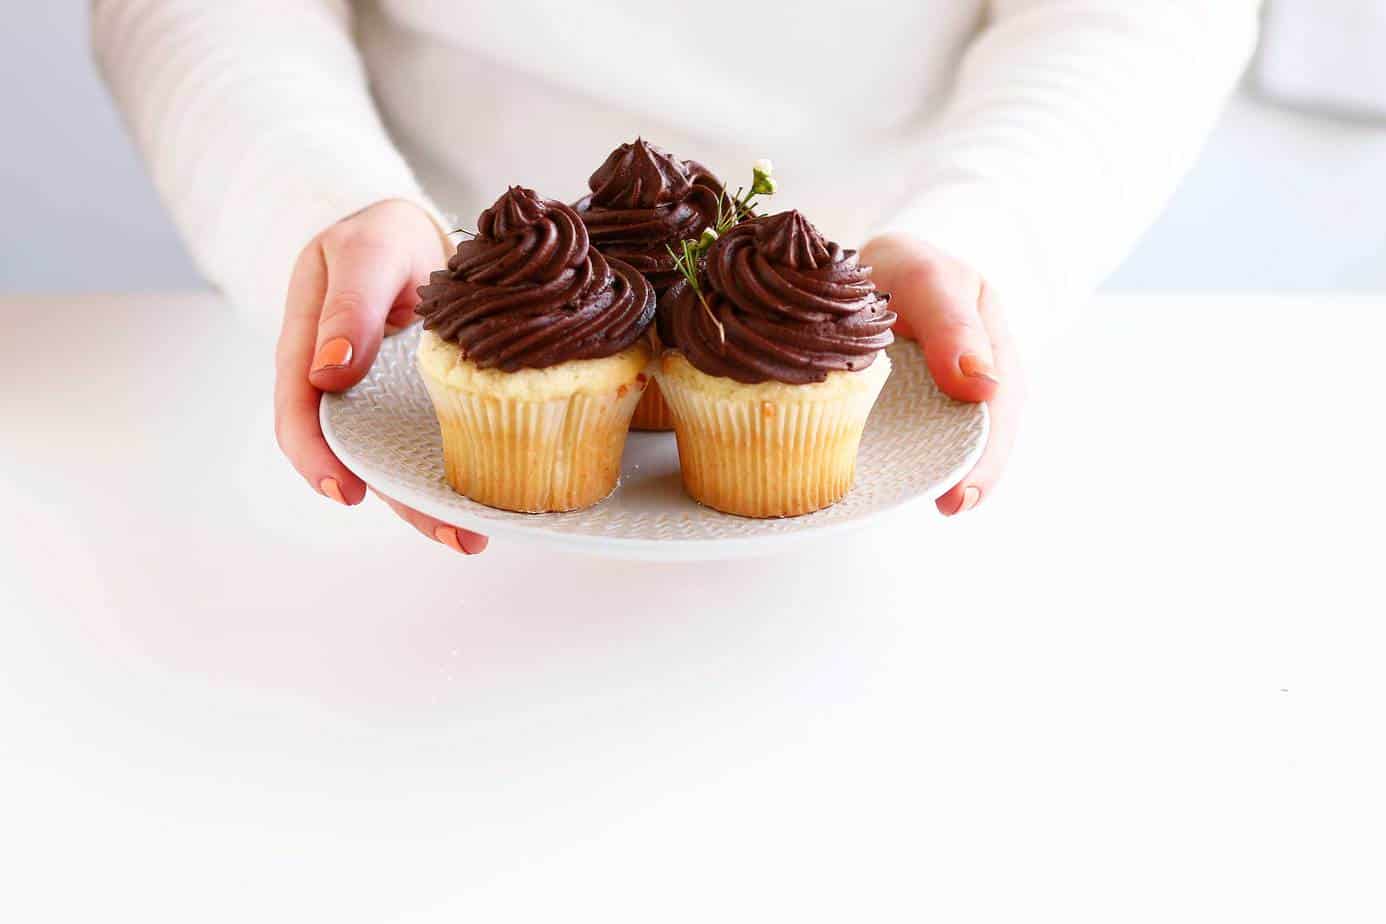 The ultimate go to cupcake recipe, these Easy Vanilla Cupcakes with Creamy Chocolate Frosting only take a few minutes to whip up and can be frozen for up to a few weeks! The only cupcake recipe you will ever need!